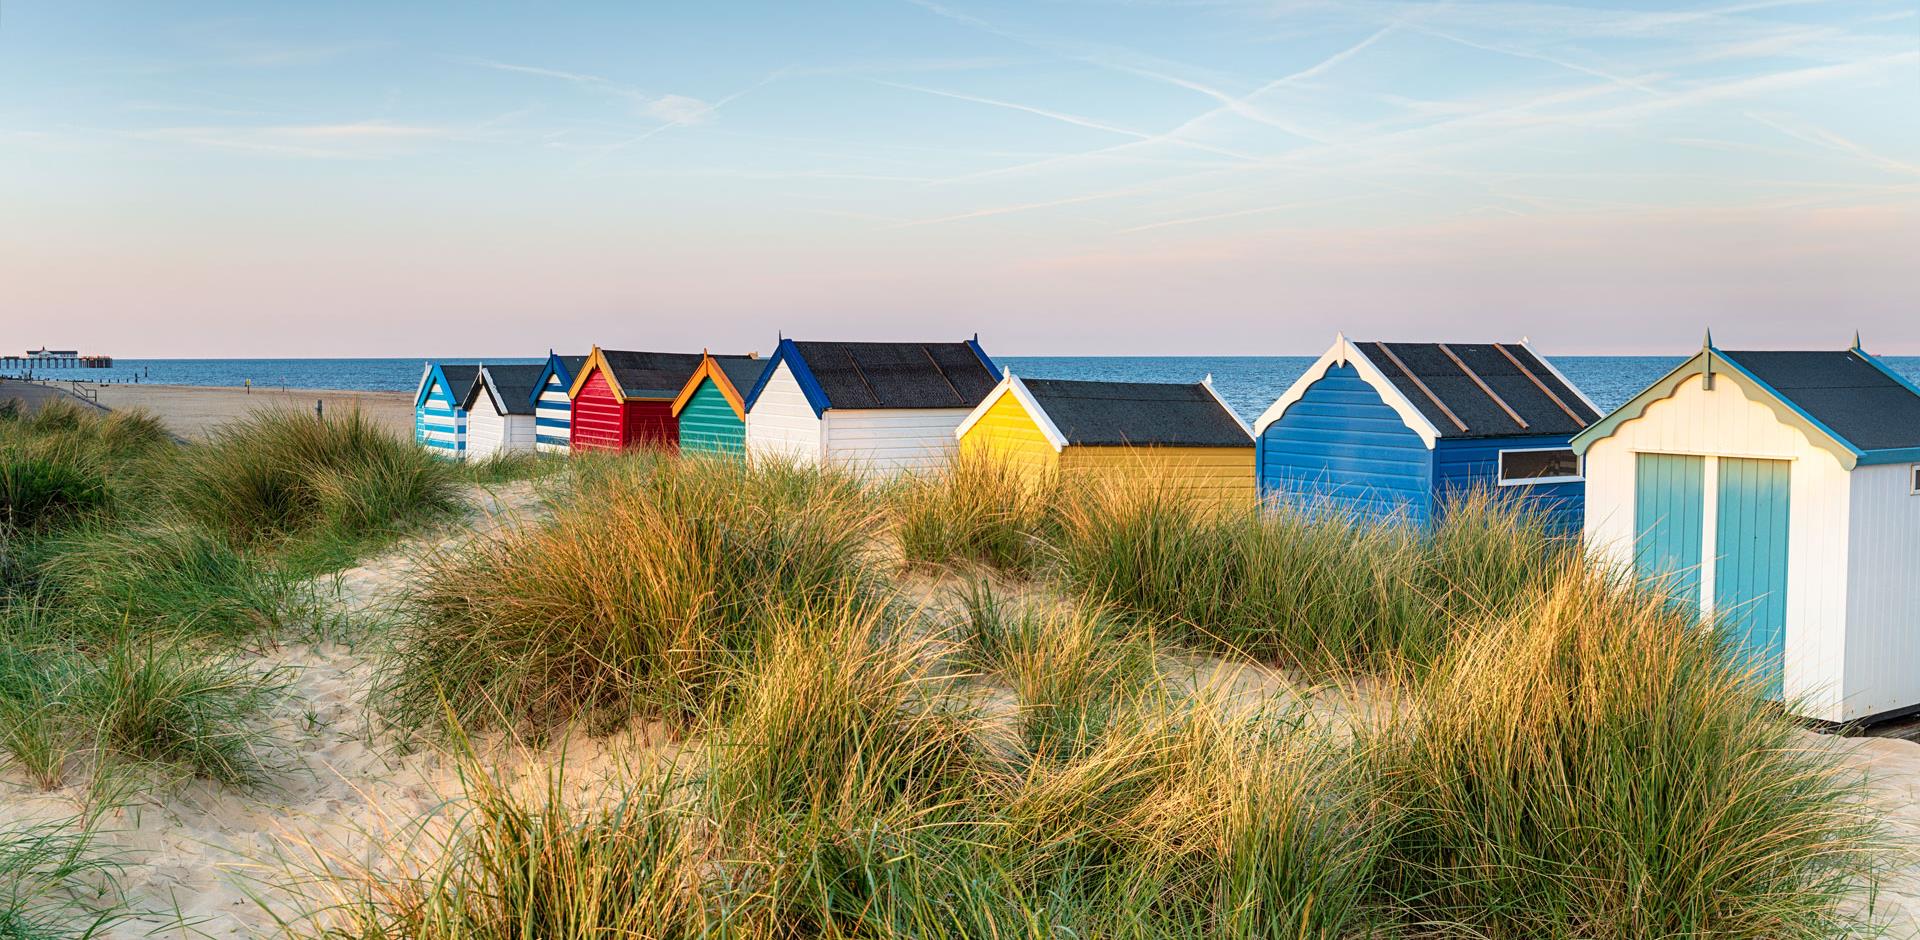 Colourful beach huts at Southwold in Suffolk